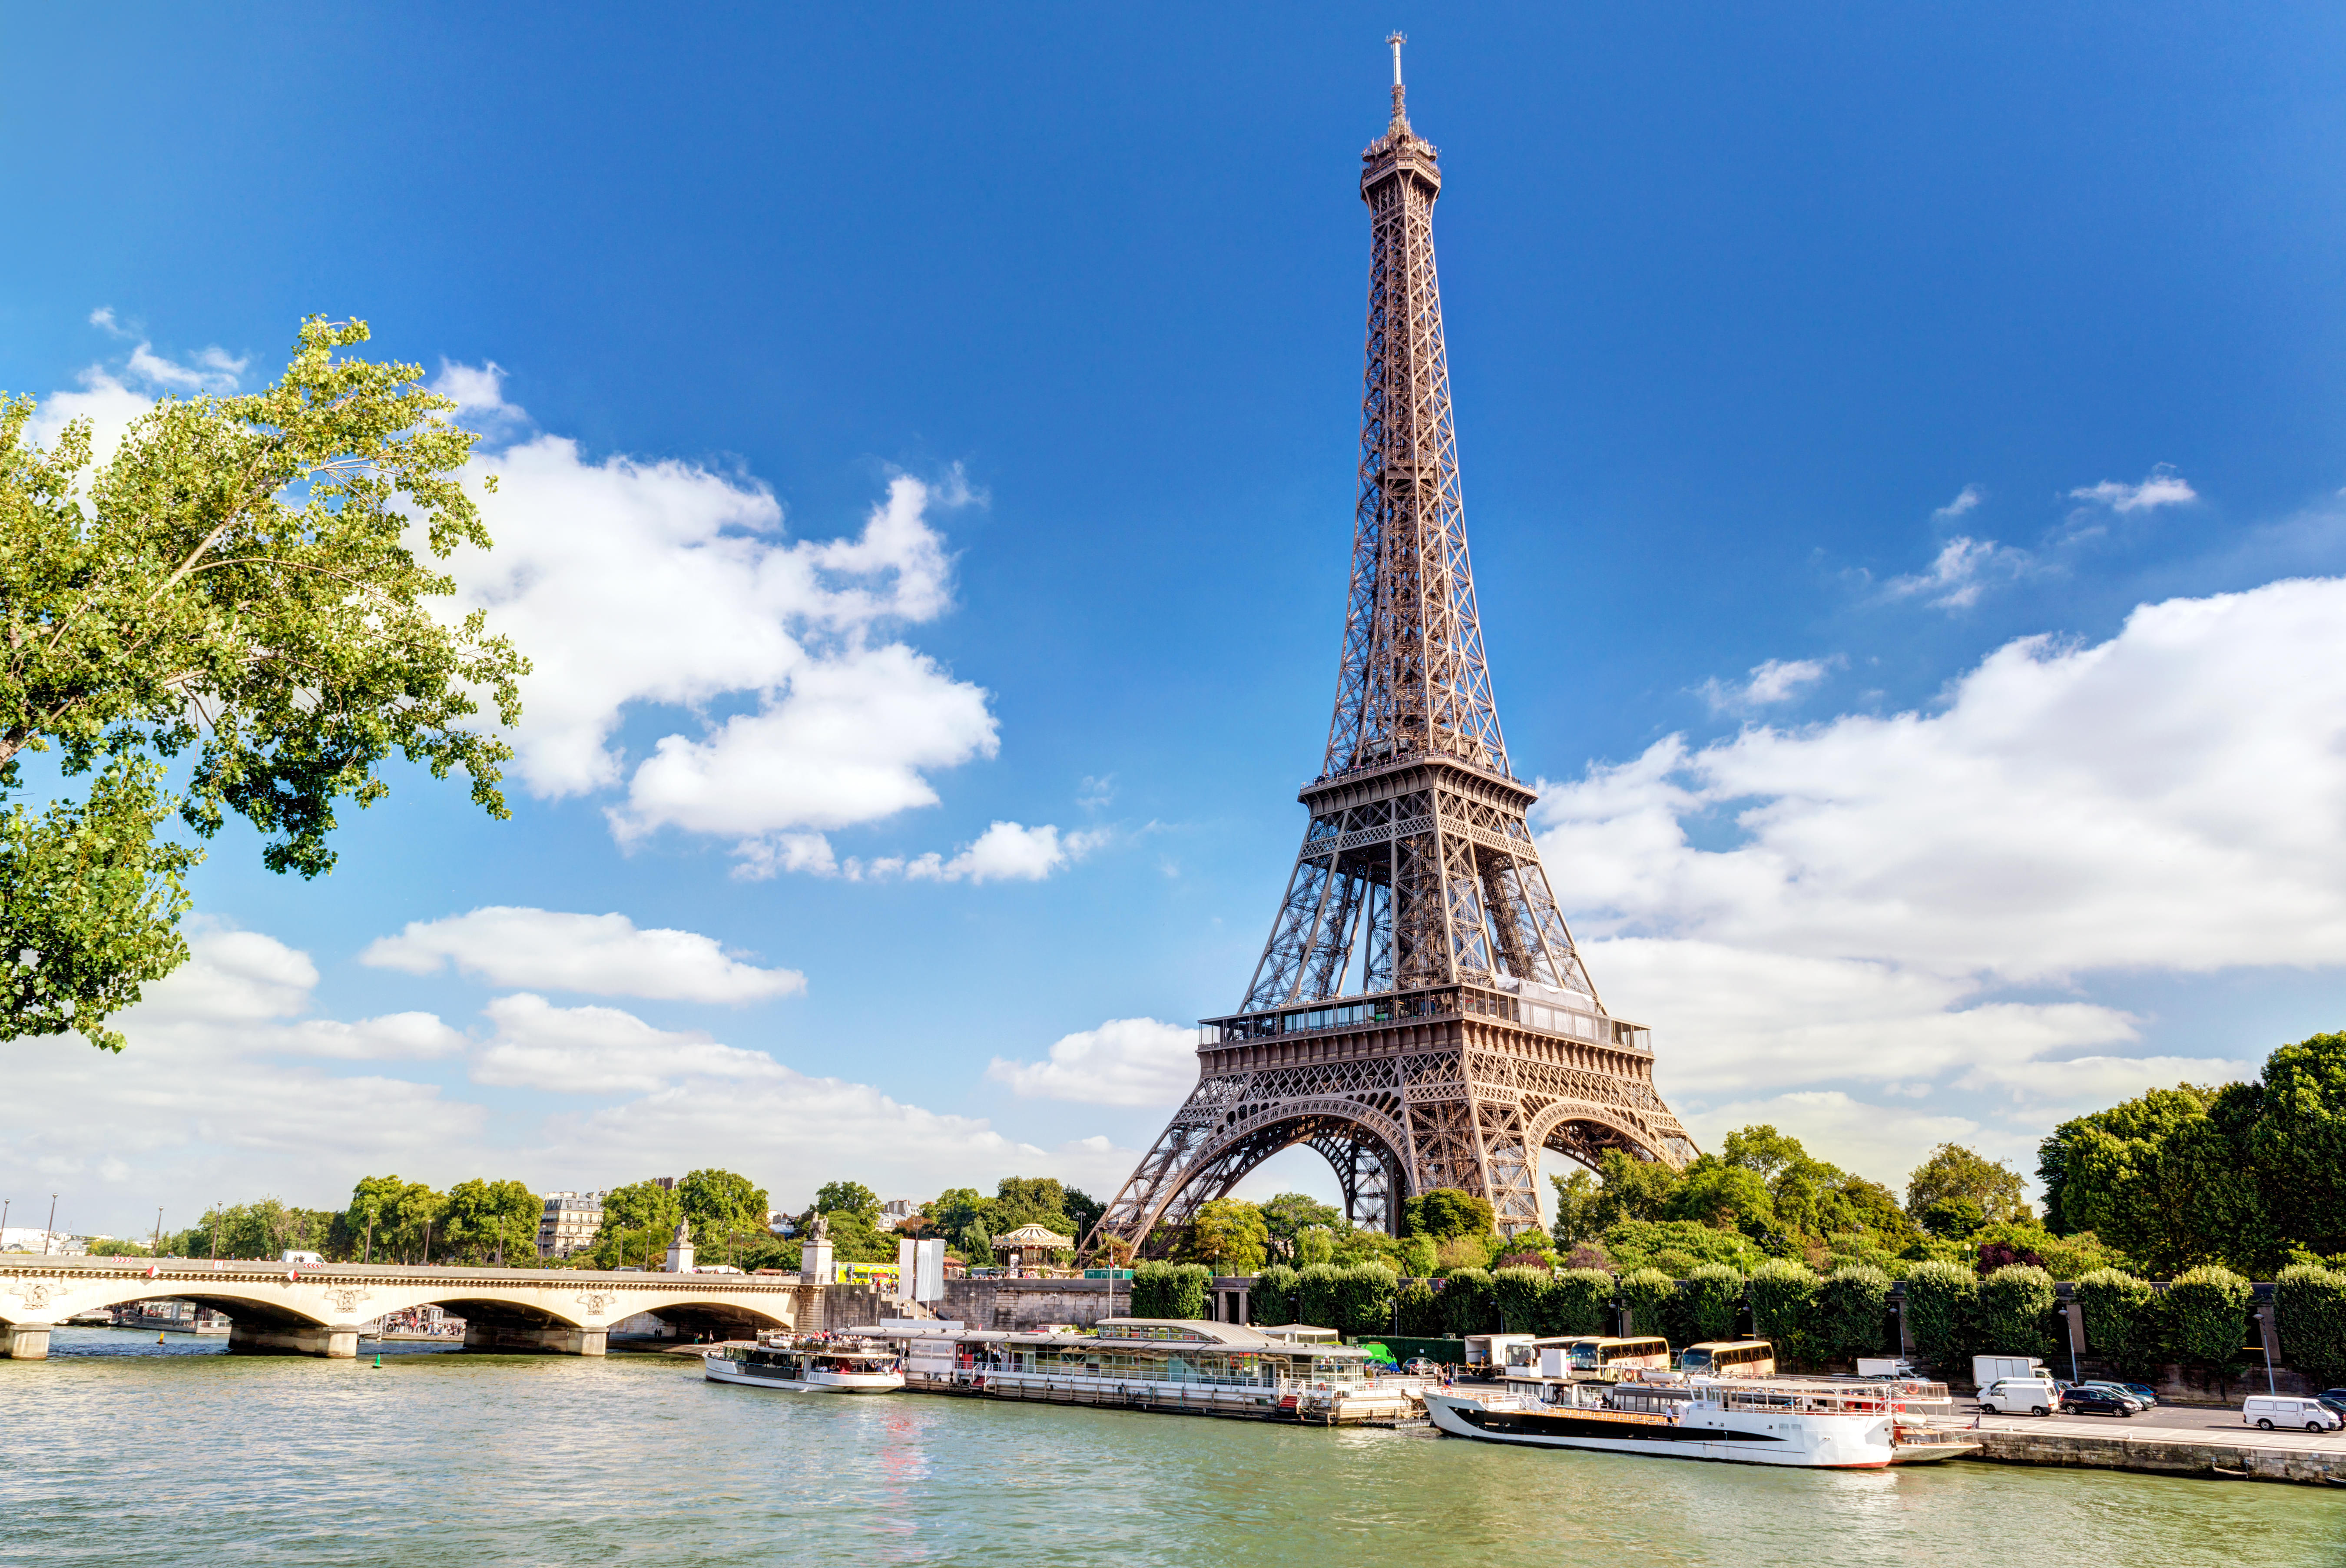 Experience the Eiffel tower's beauty